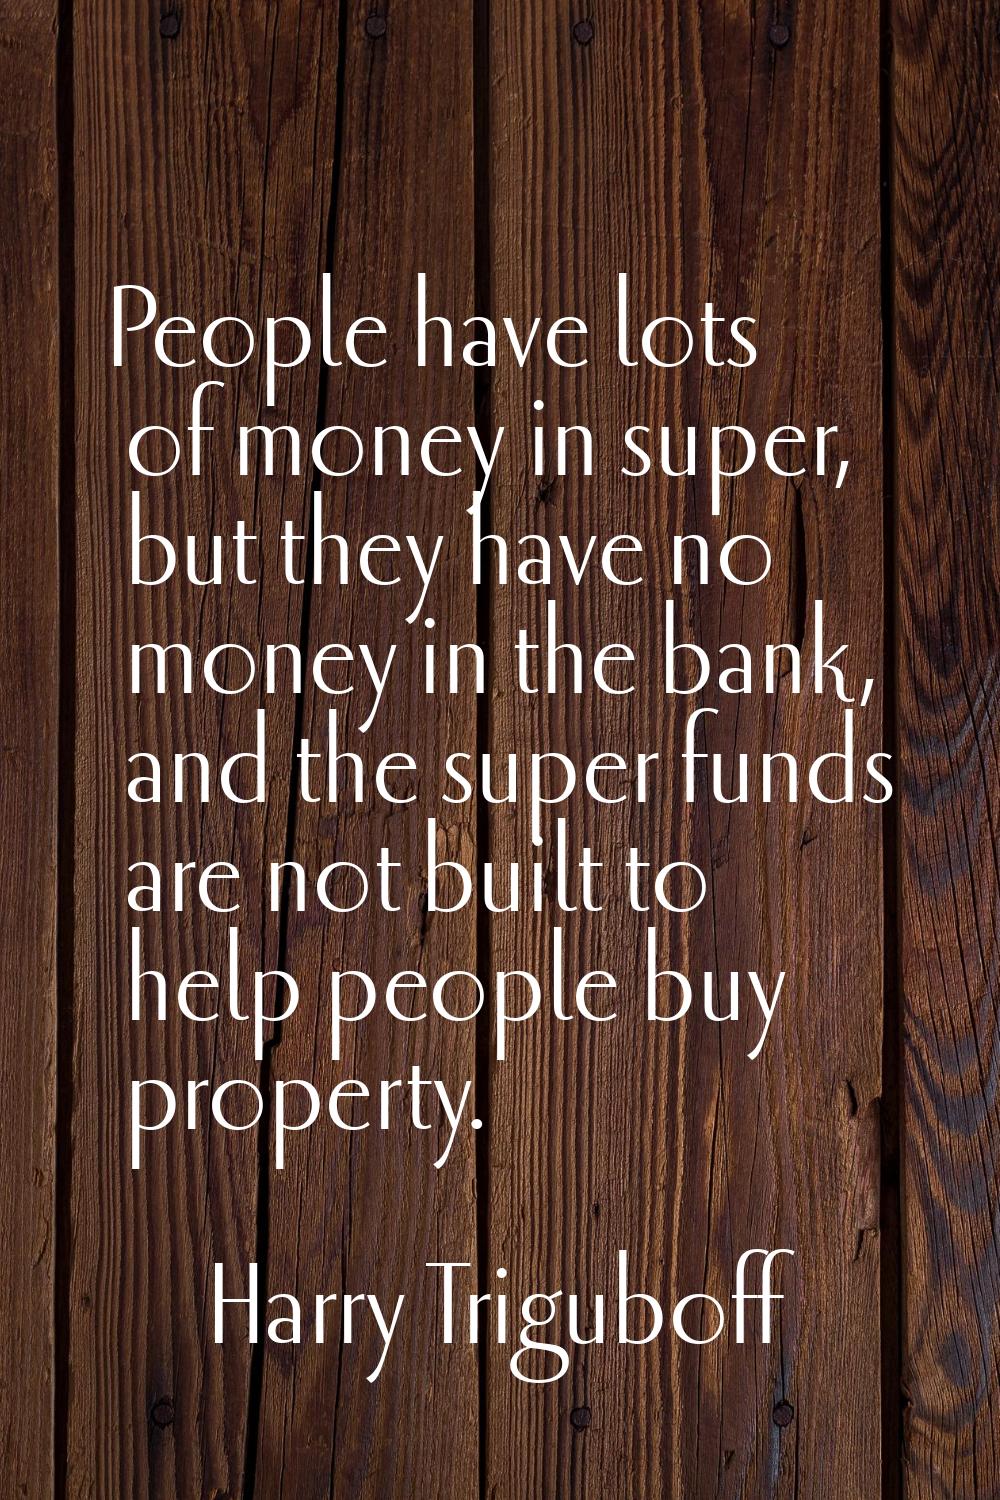 People have lots of money in super, but they have no money in the bank, and the super funds are not